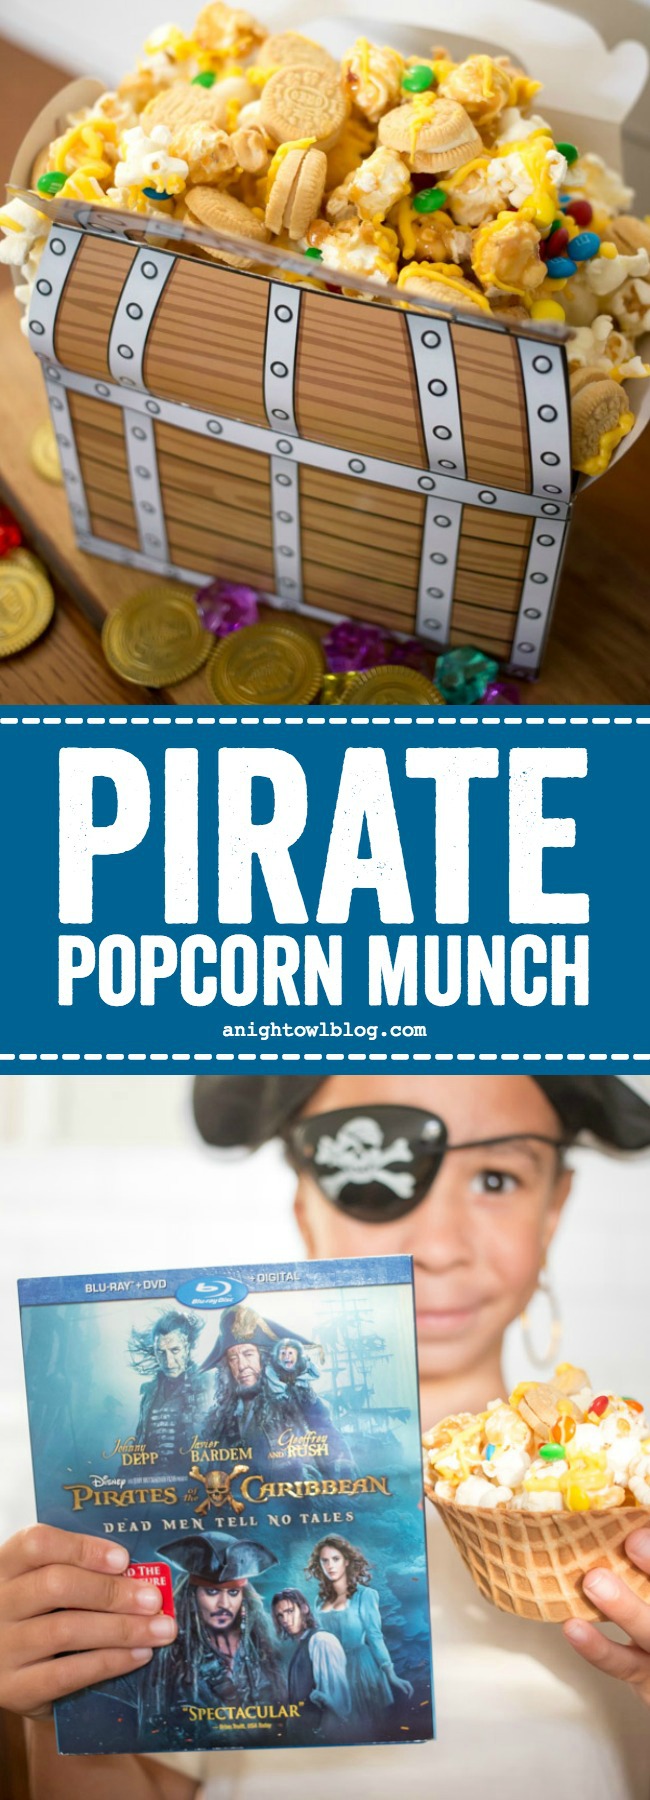 Buy Pirates Of The Caribbean: Dead Men Tell No Tales on Bluray today and whip up some Pirate Popcorn Munch for a swashbuckling good family movie night!